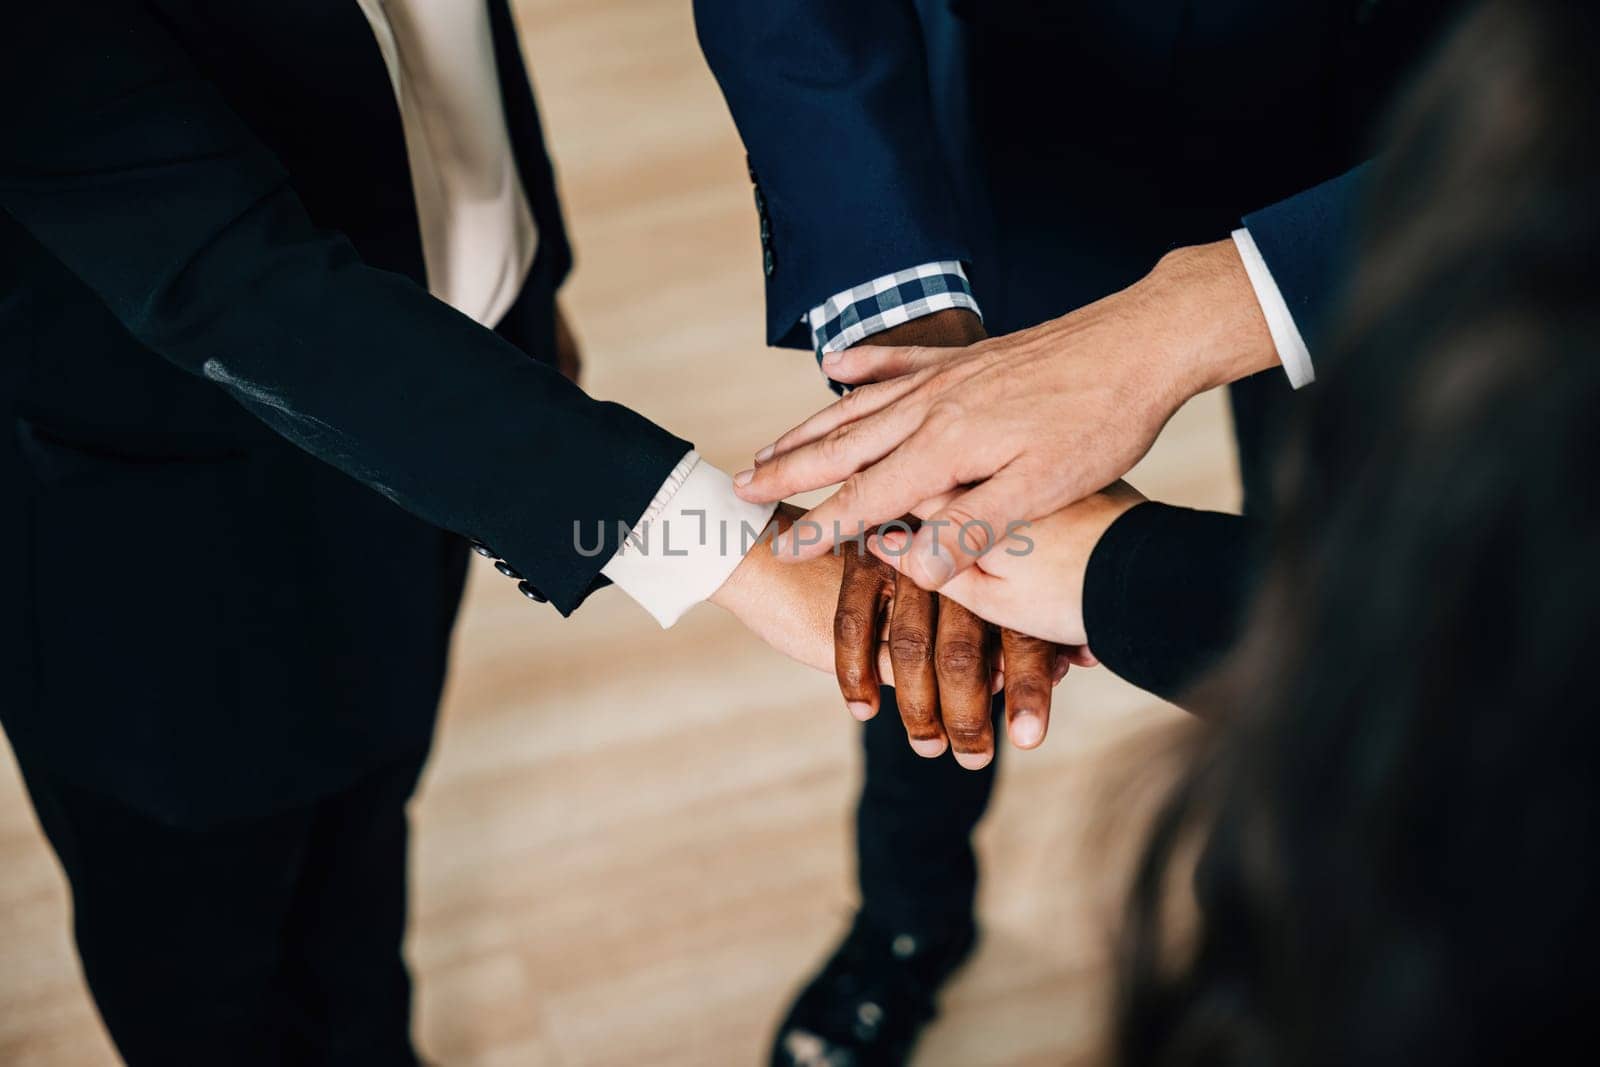 Business professionals gather in a modern office, their hands stacked in a circle as a symbol of achievement and unity. The scene exemplifies cooperation, communication, and a diverse workforce. by Sorapop